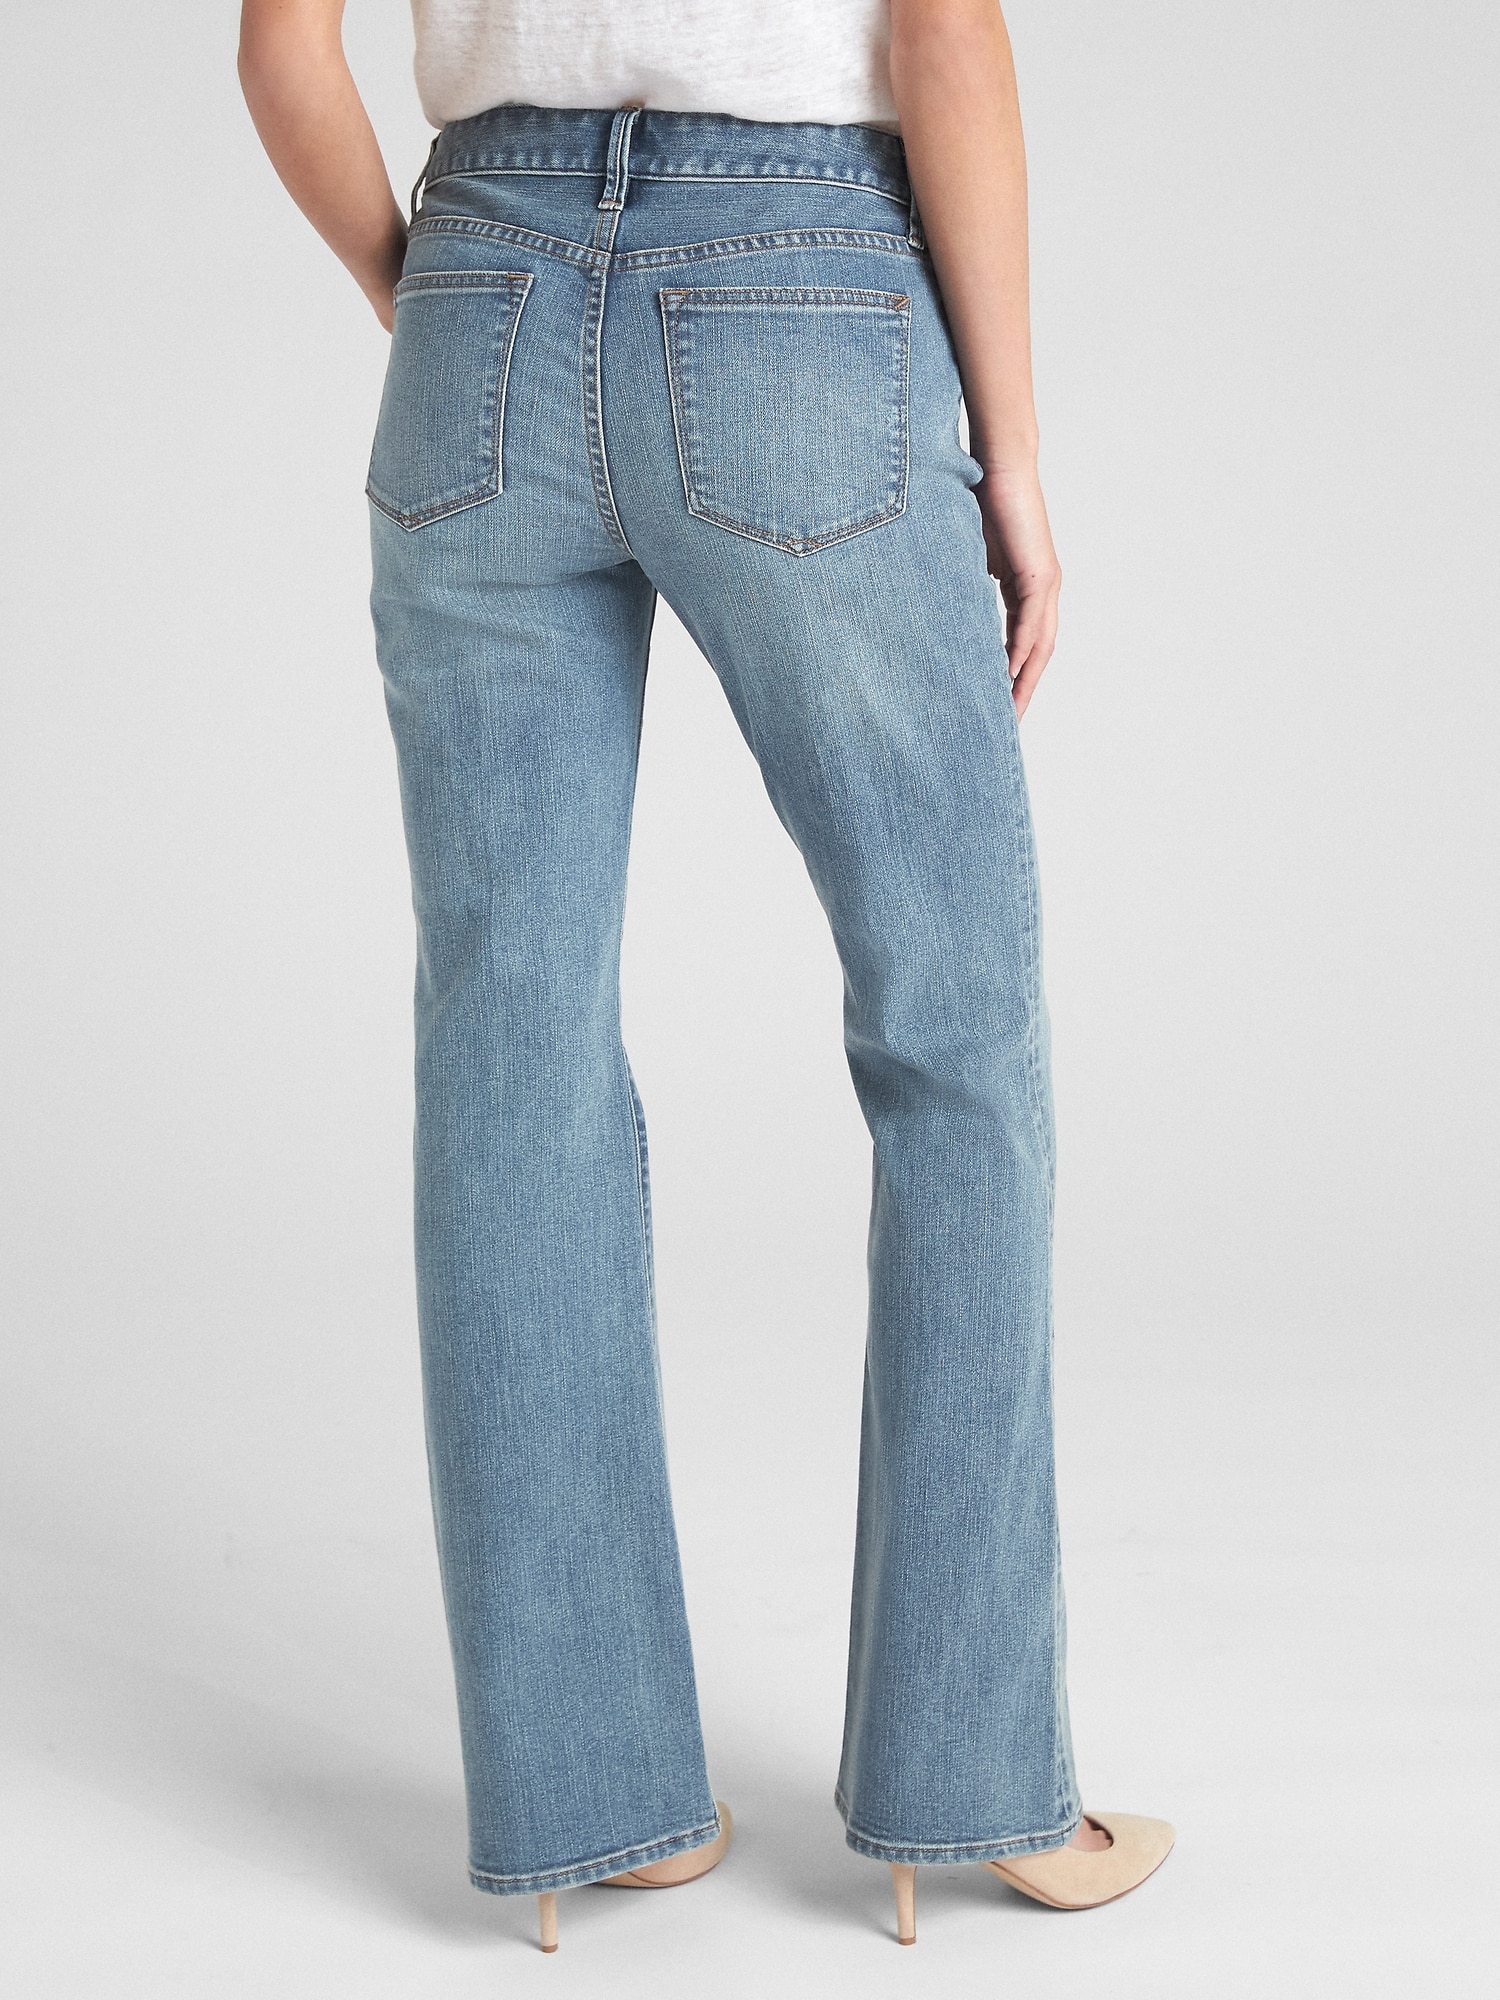 jeans similar to gap long and lean